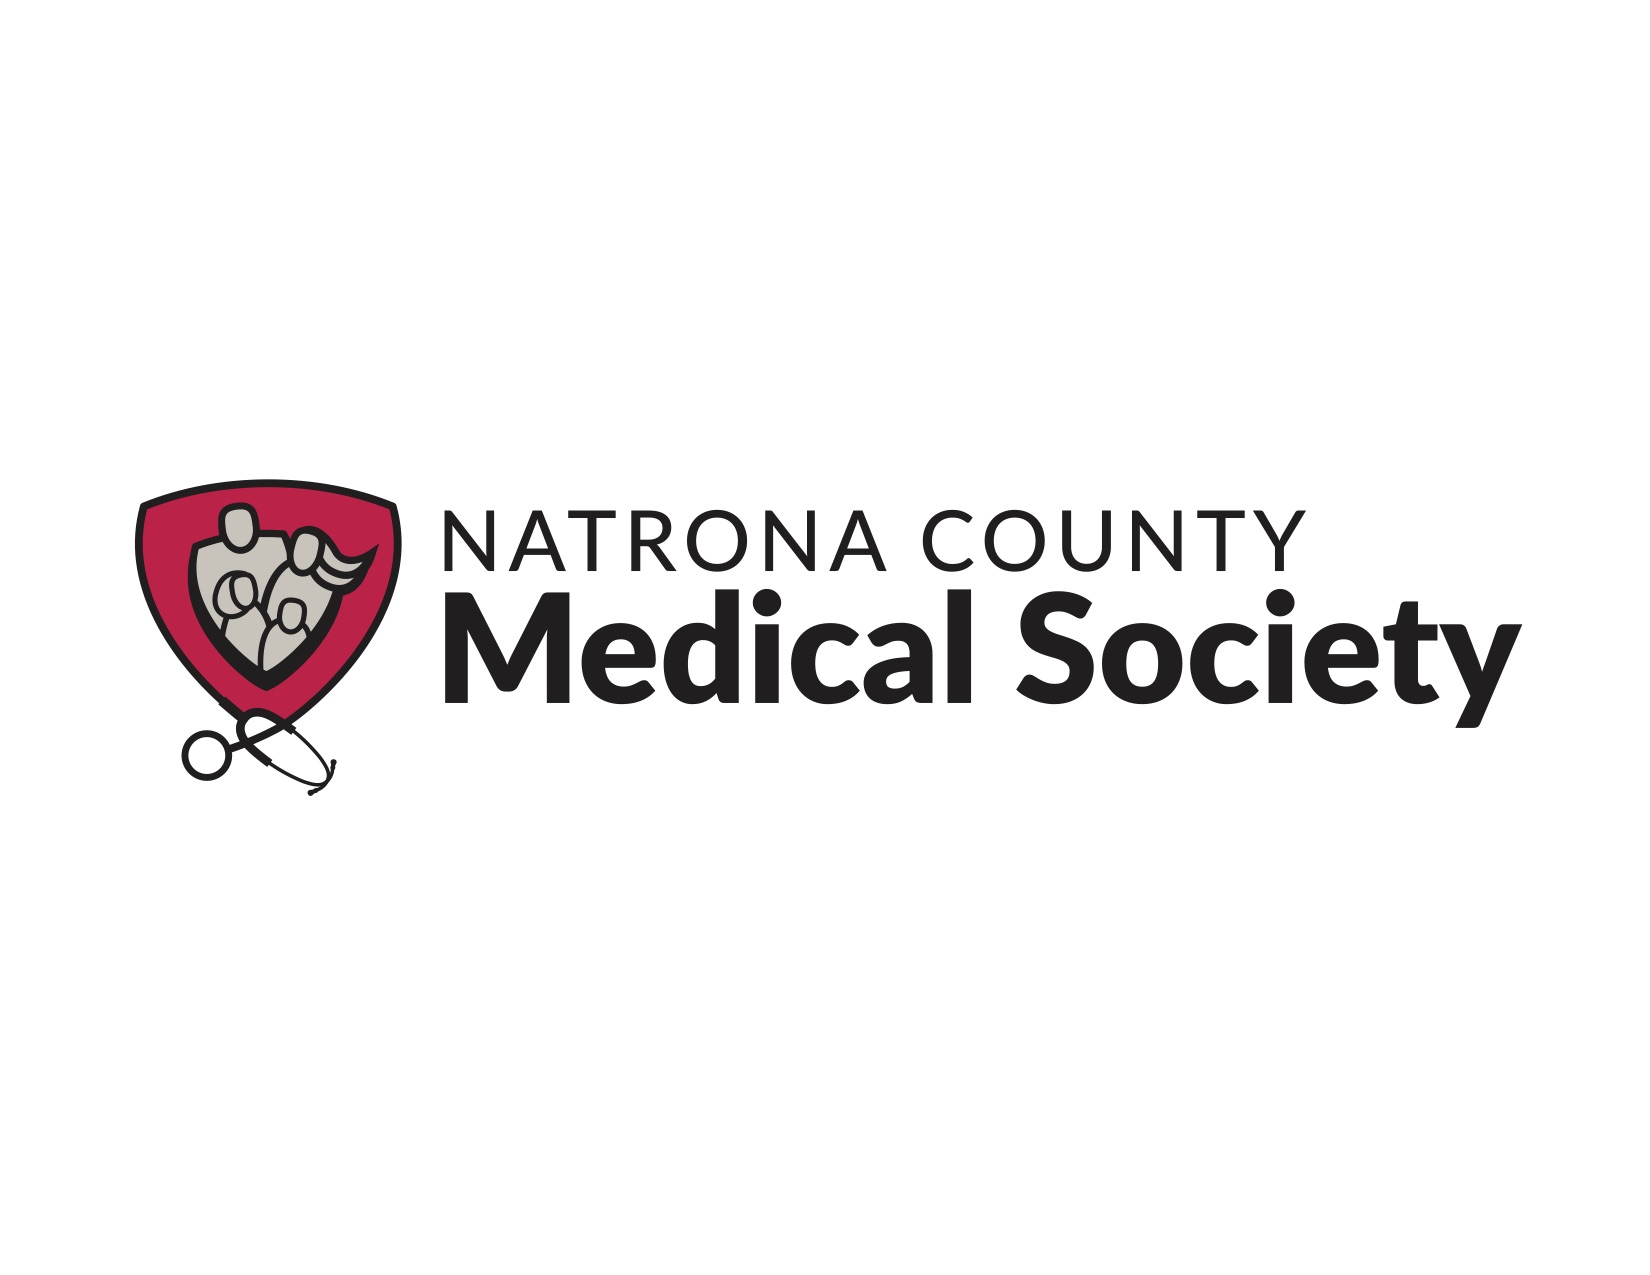 County Medical Societies See Increased Activity